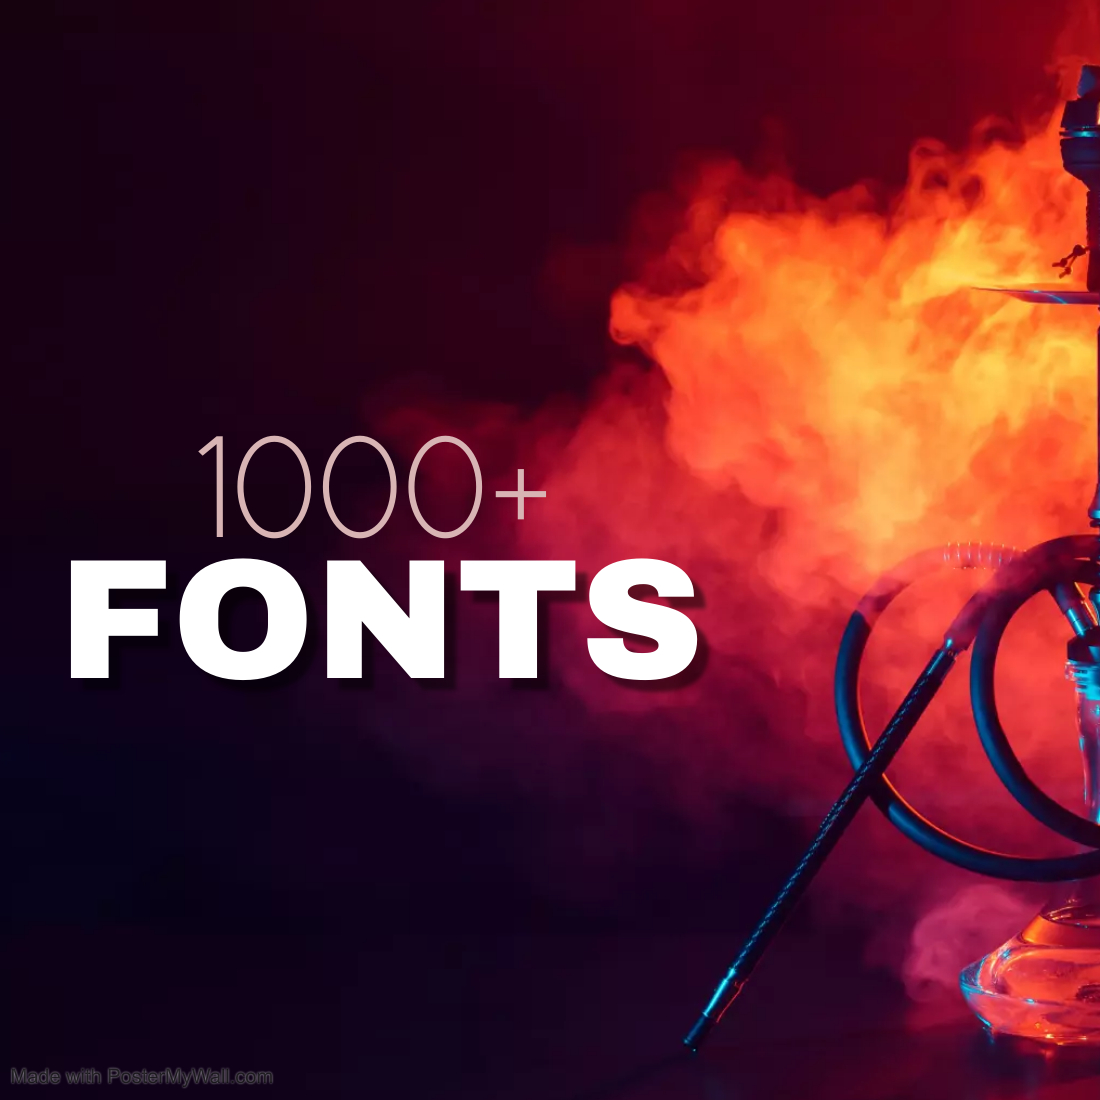 1000+ Special Fonts containing San Serif, Serif, Gothic, Fancy Fonts etc cover image.